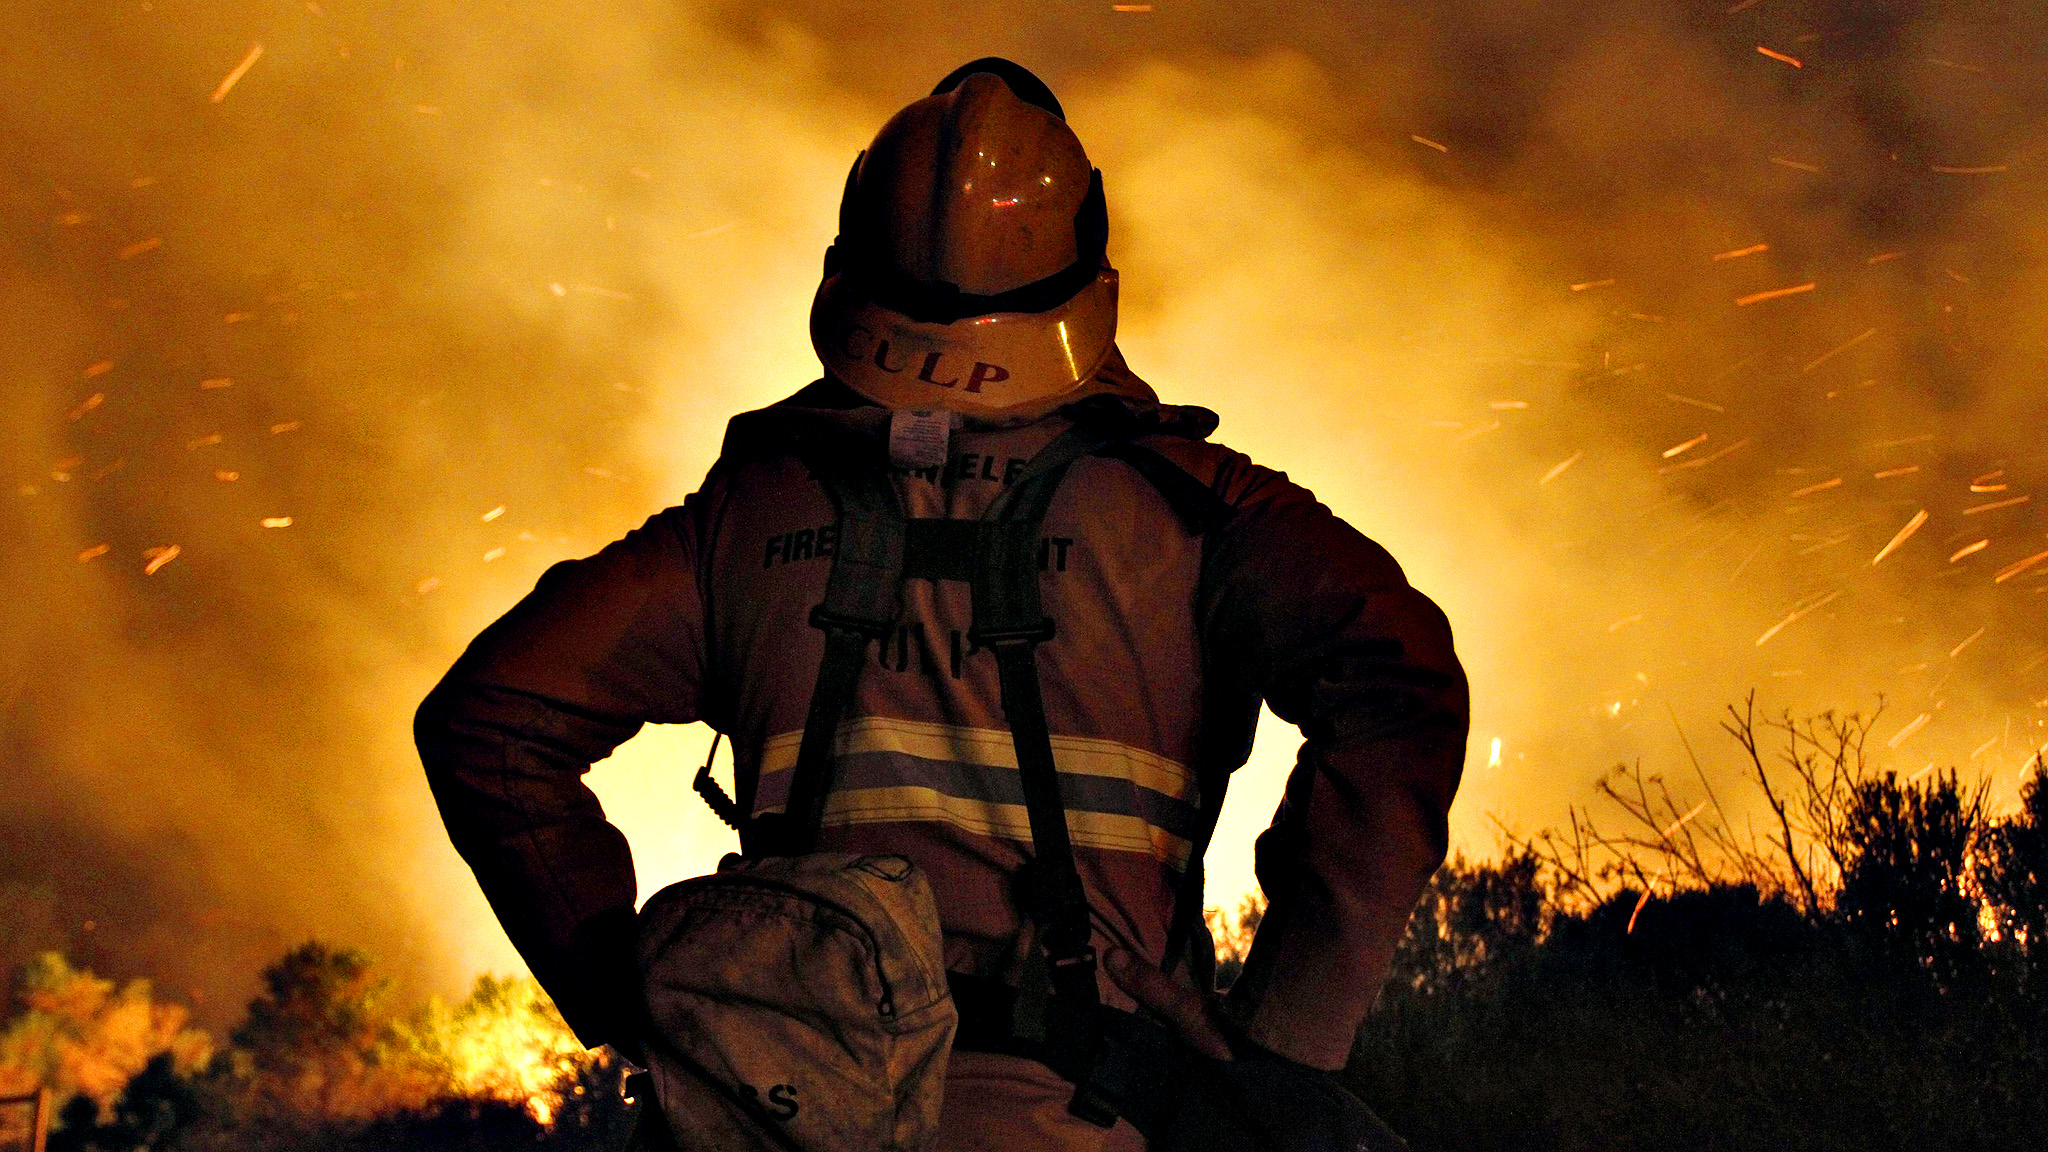 Firefighter Puter Background Image Amp Pictures Becuo